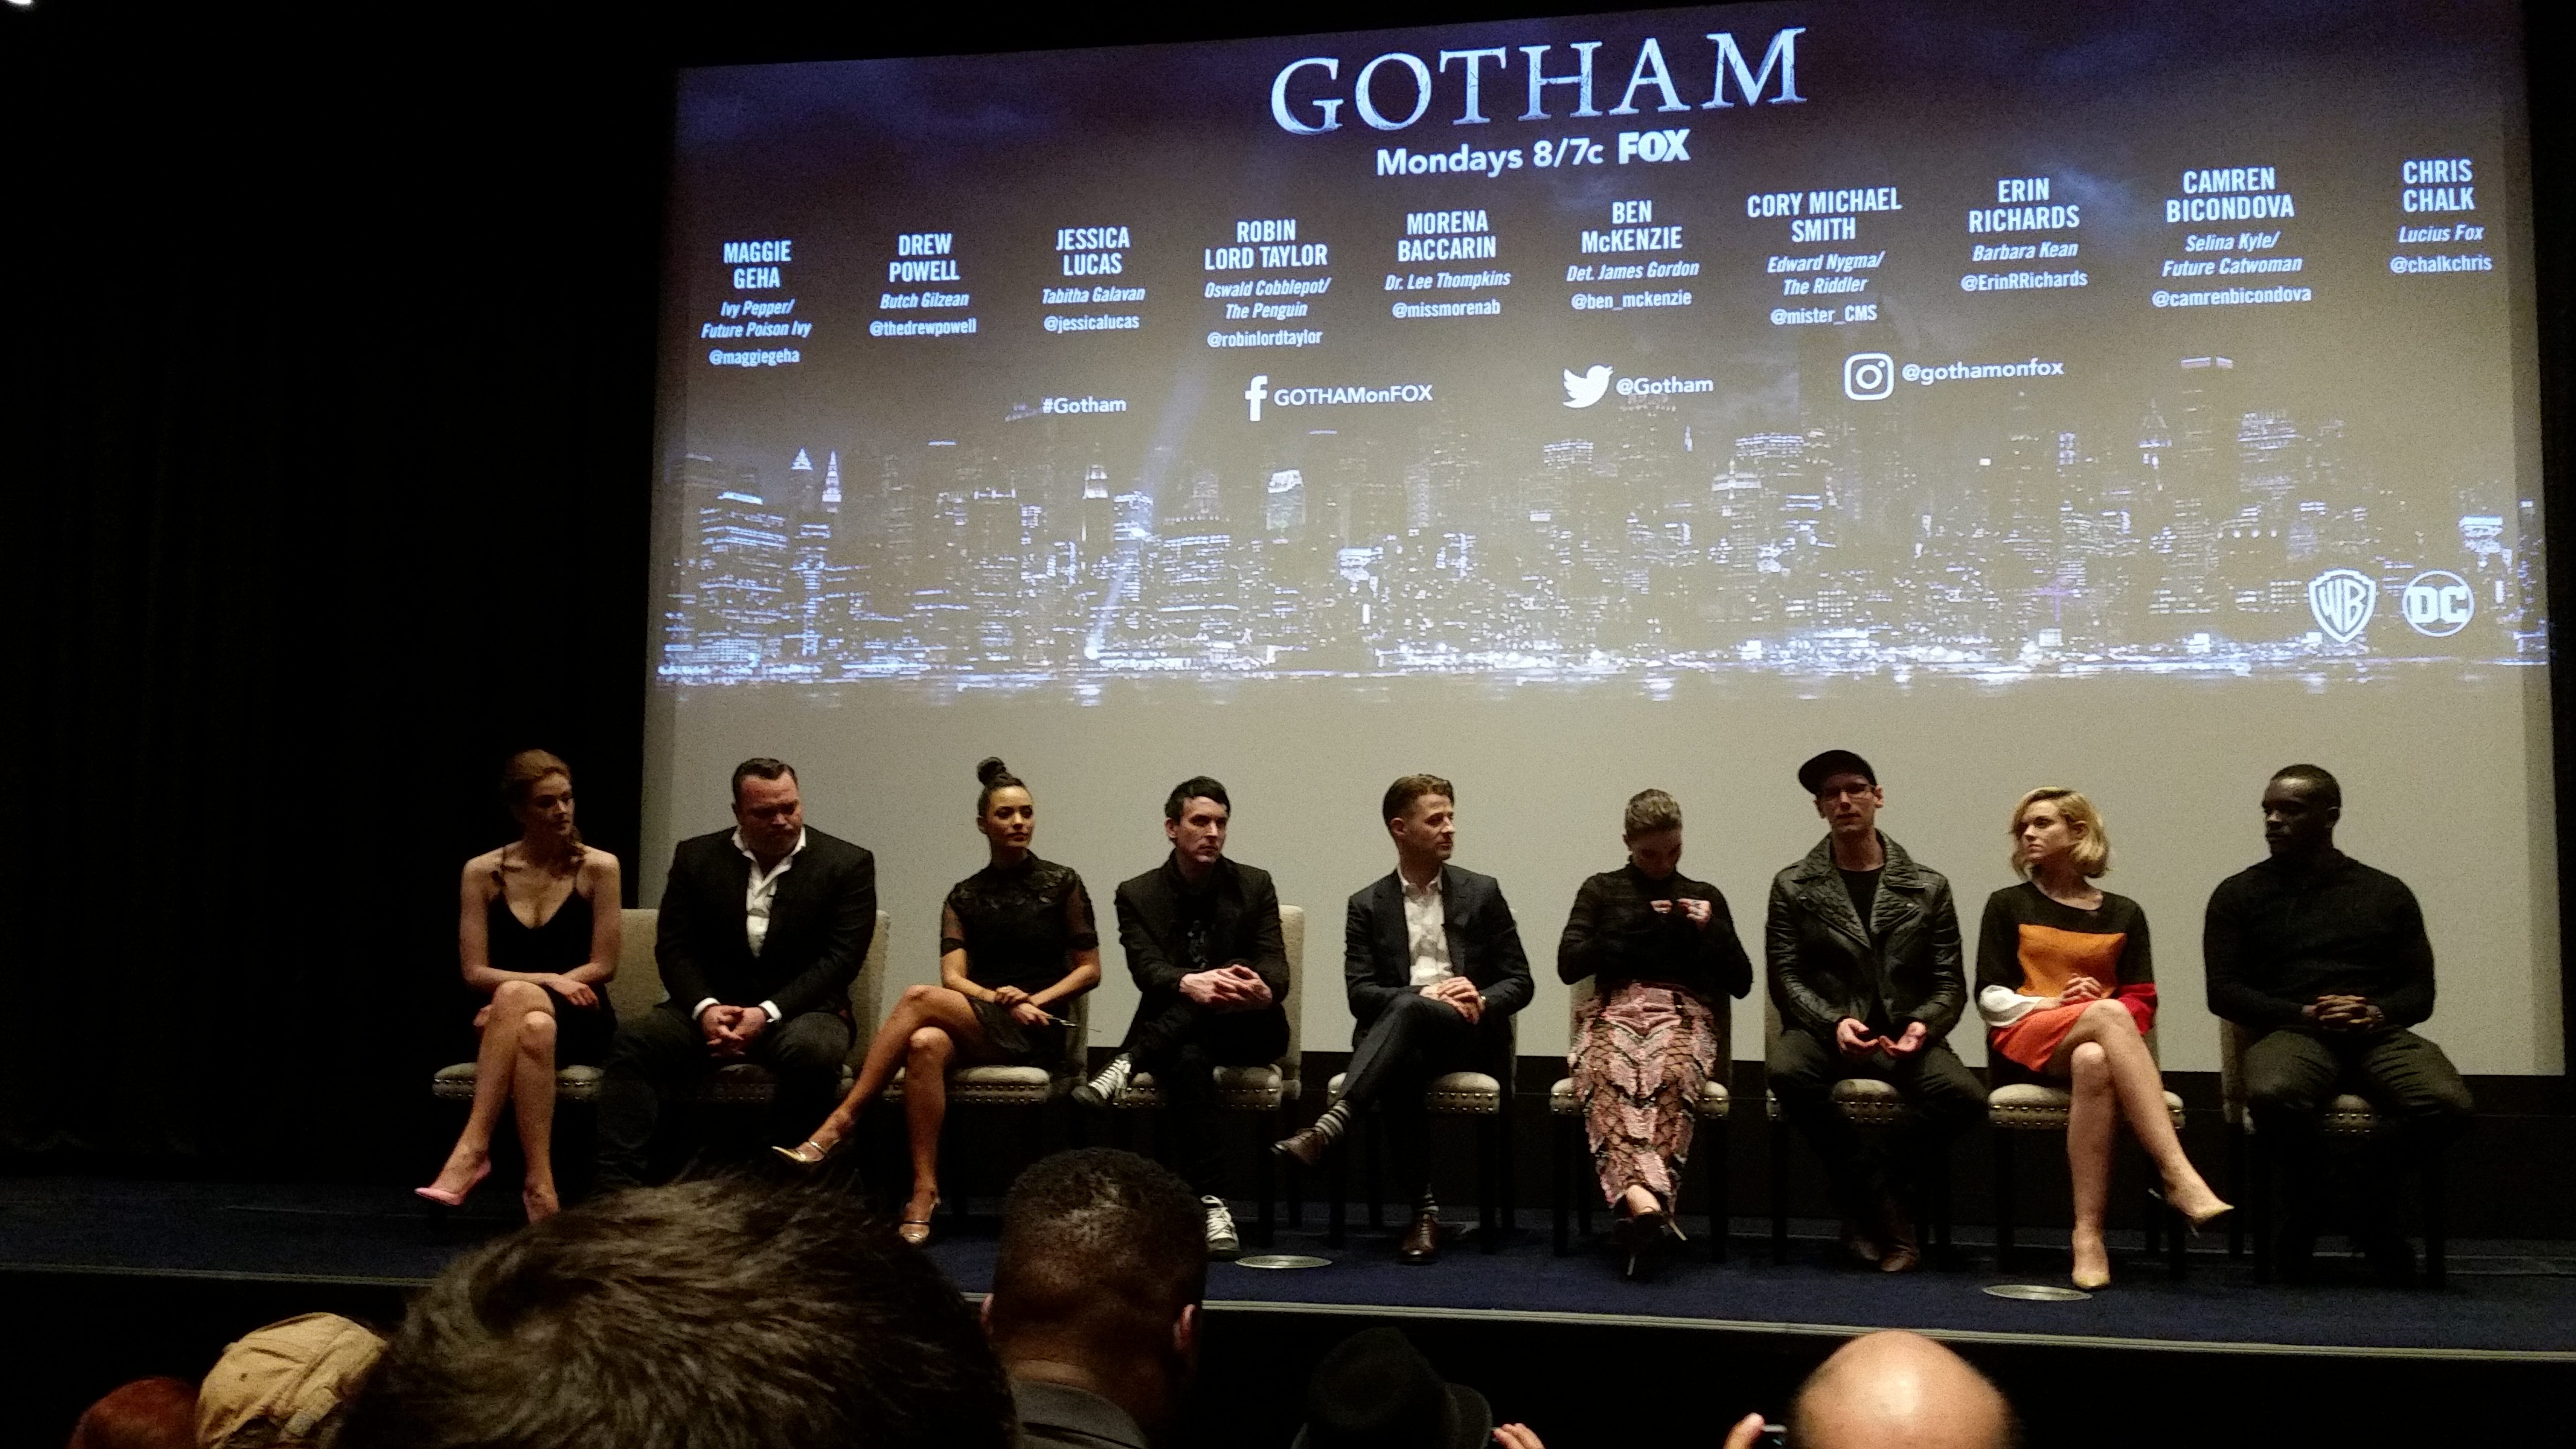 Gotham 3.15- “Heroes Rise: How The Riddler Got His Name” Q & A